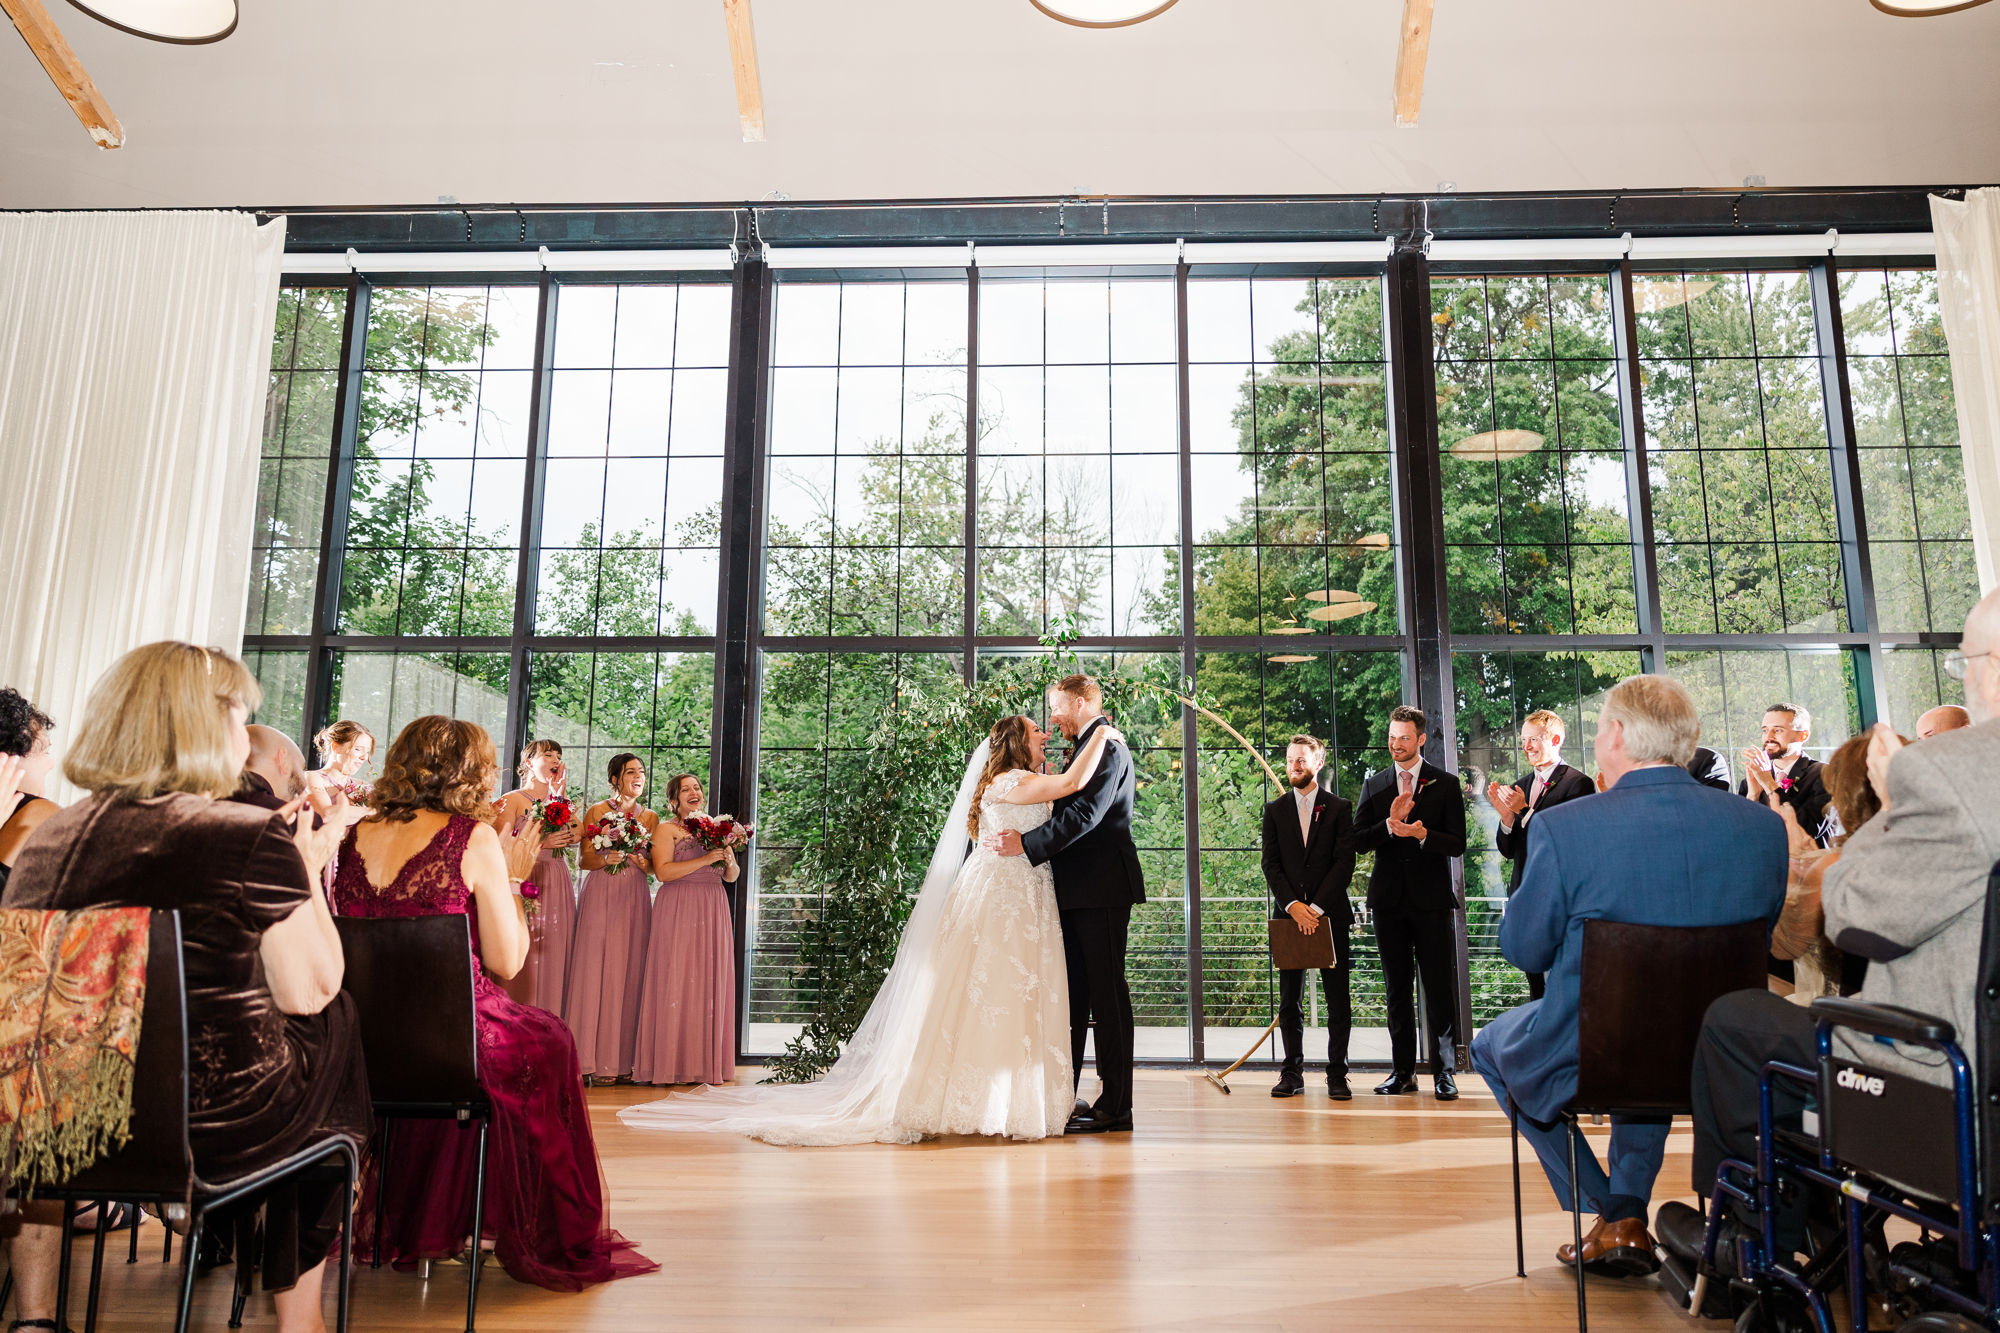 Playful Autumnal Roundhouse Wedding in Beacon, NY